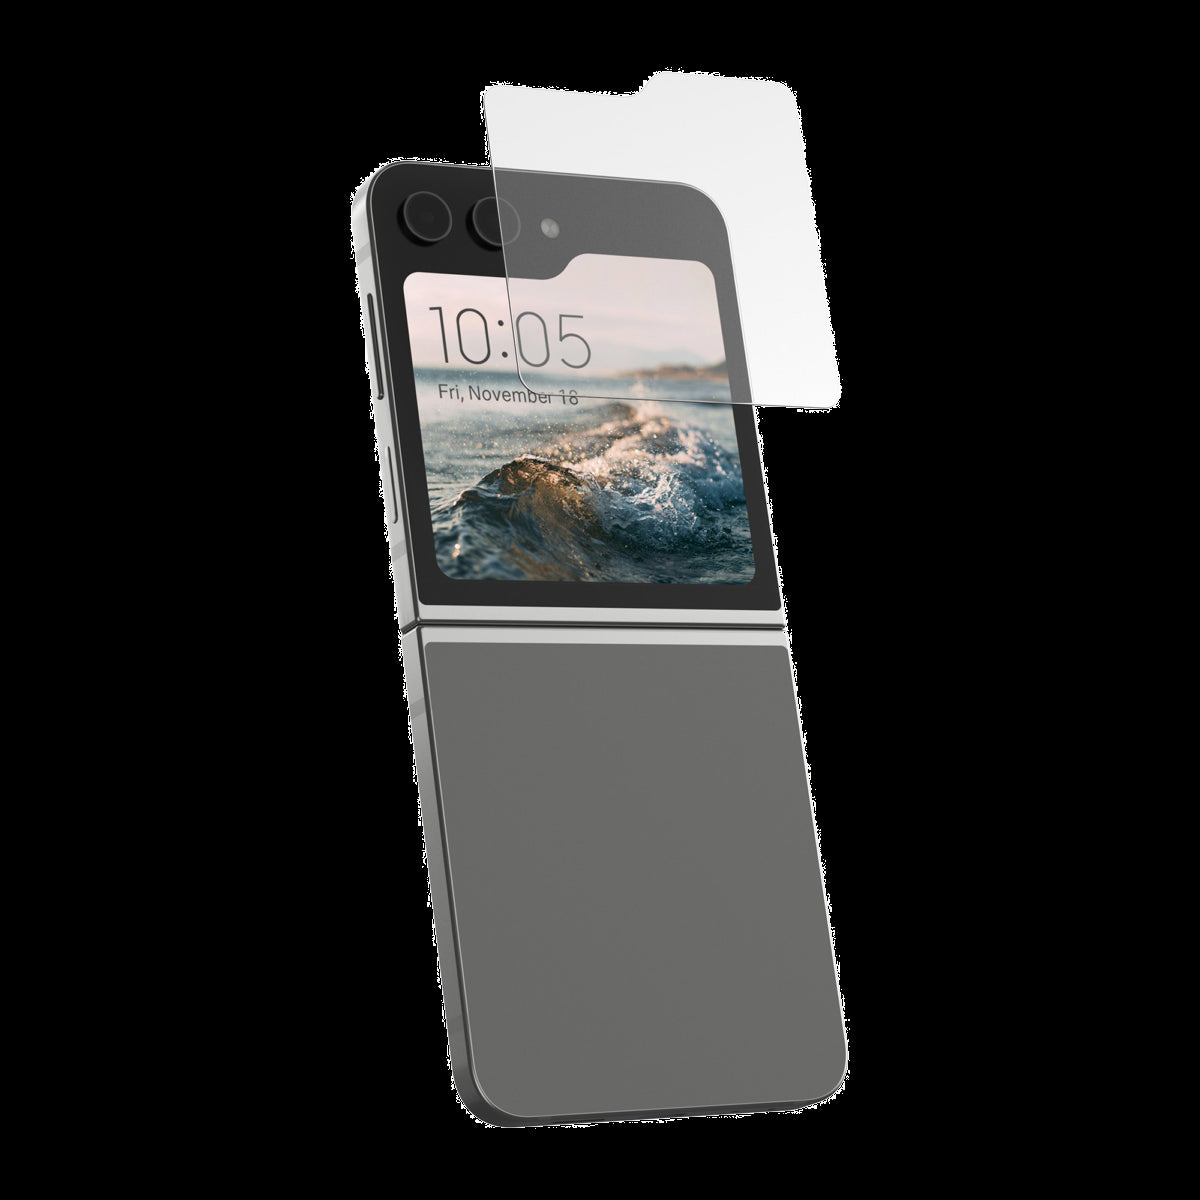 The UAG Glass Shield screen protector is built to withstand daily use and then some with up to 6 ft of drop protection.